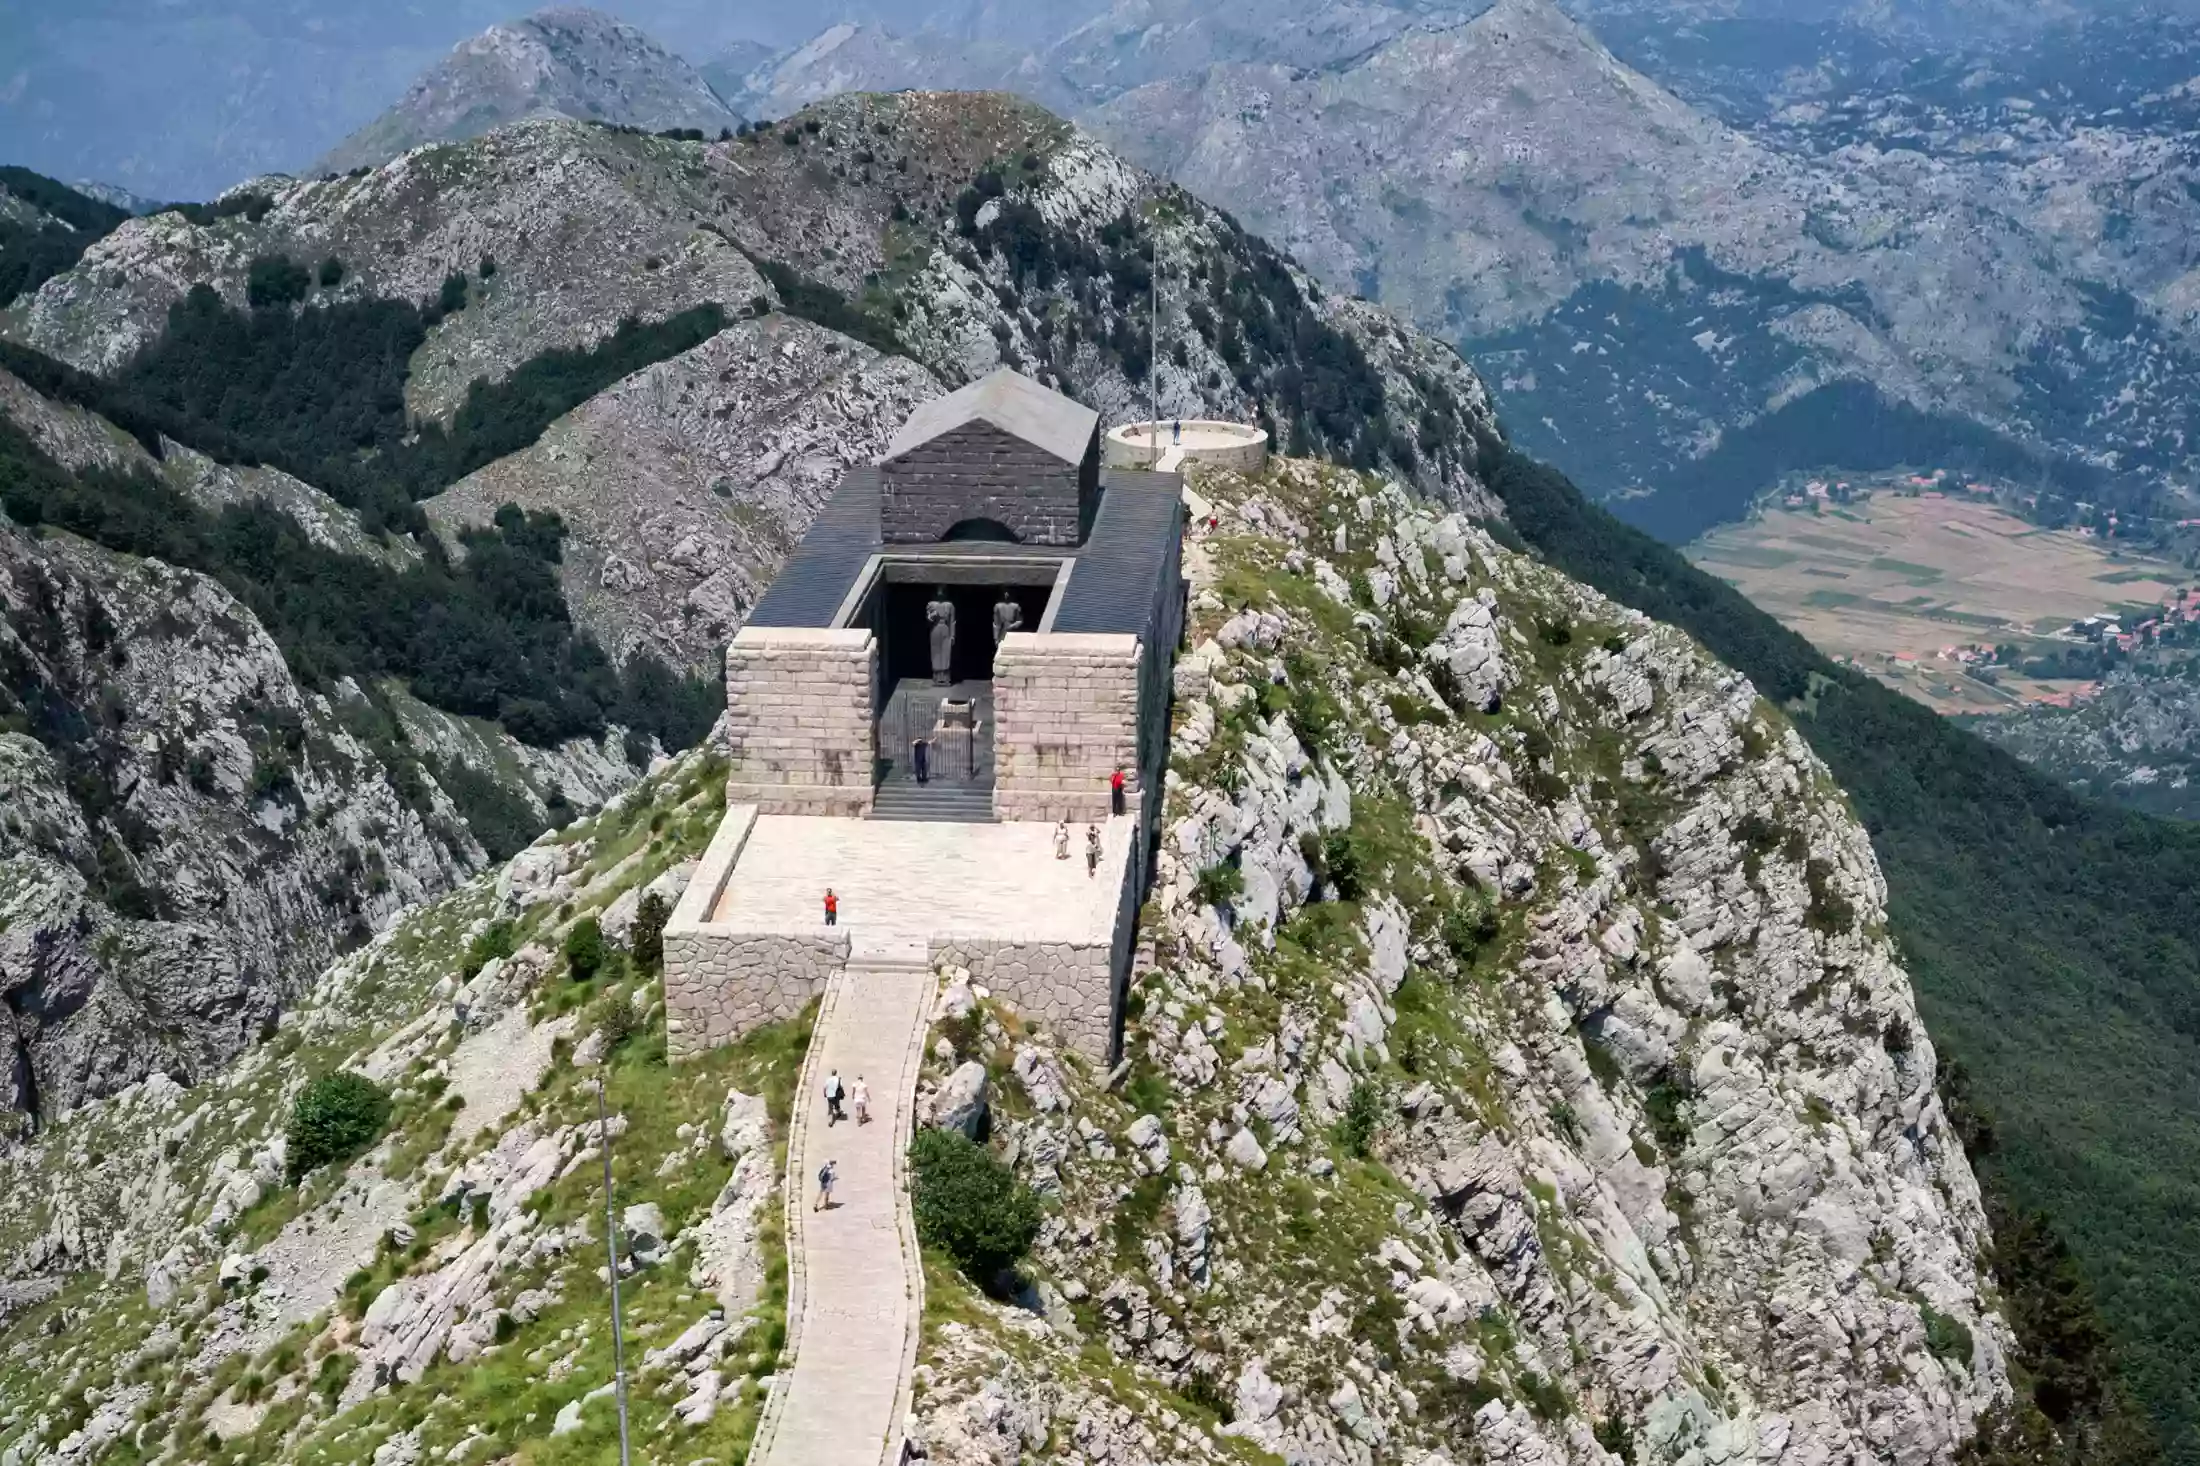 Areal view of the Mausoleum of Petar II Petrović Njegoš on Lovćen Mountain in Montenegro.